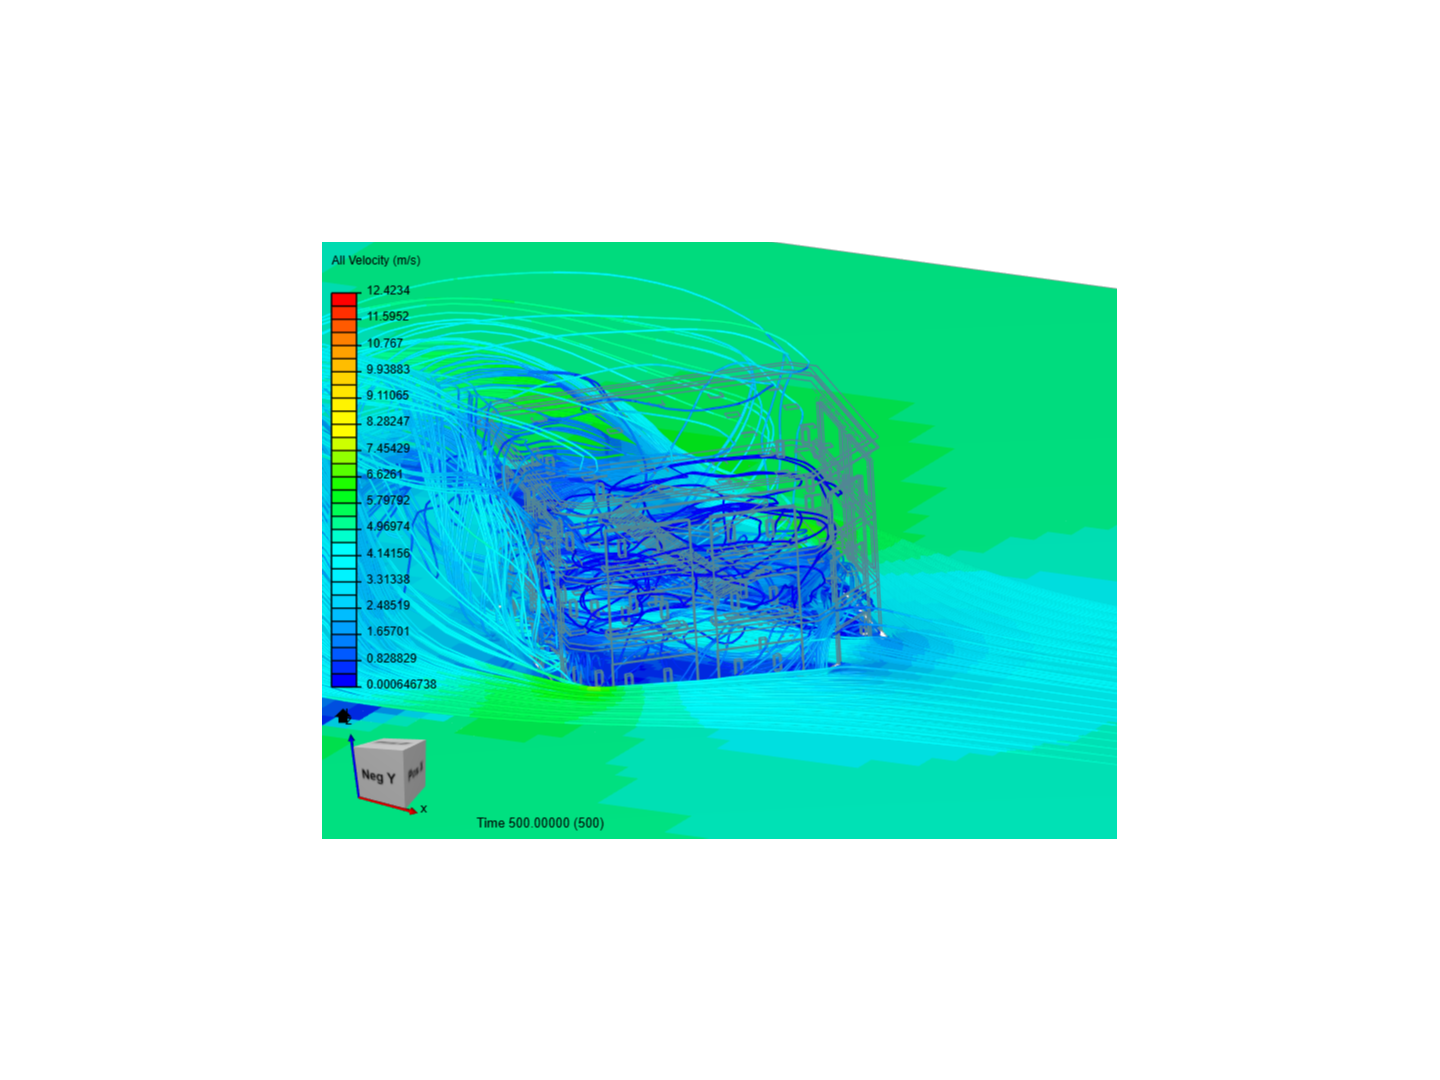 CFD flow Analysis of building image